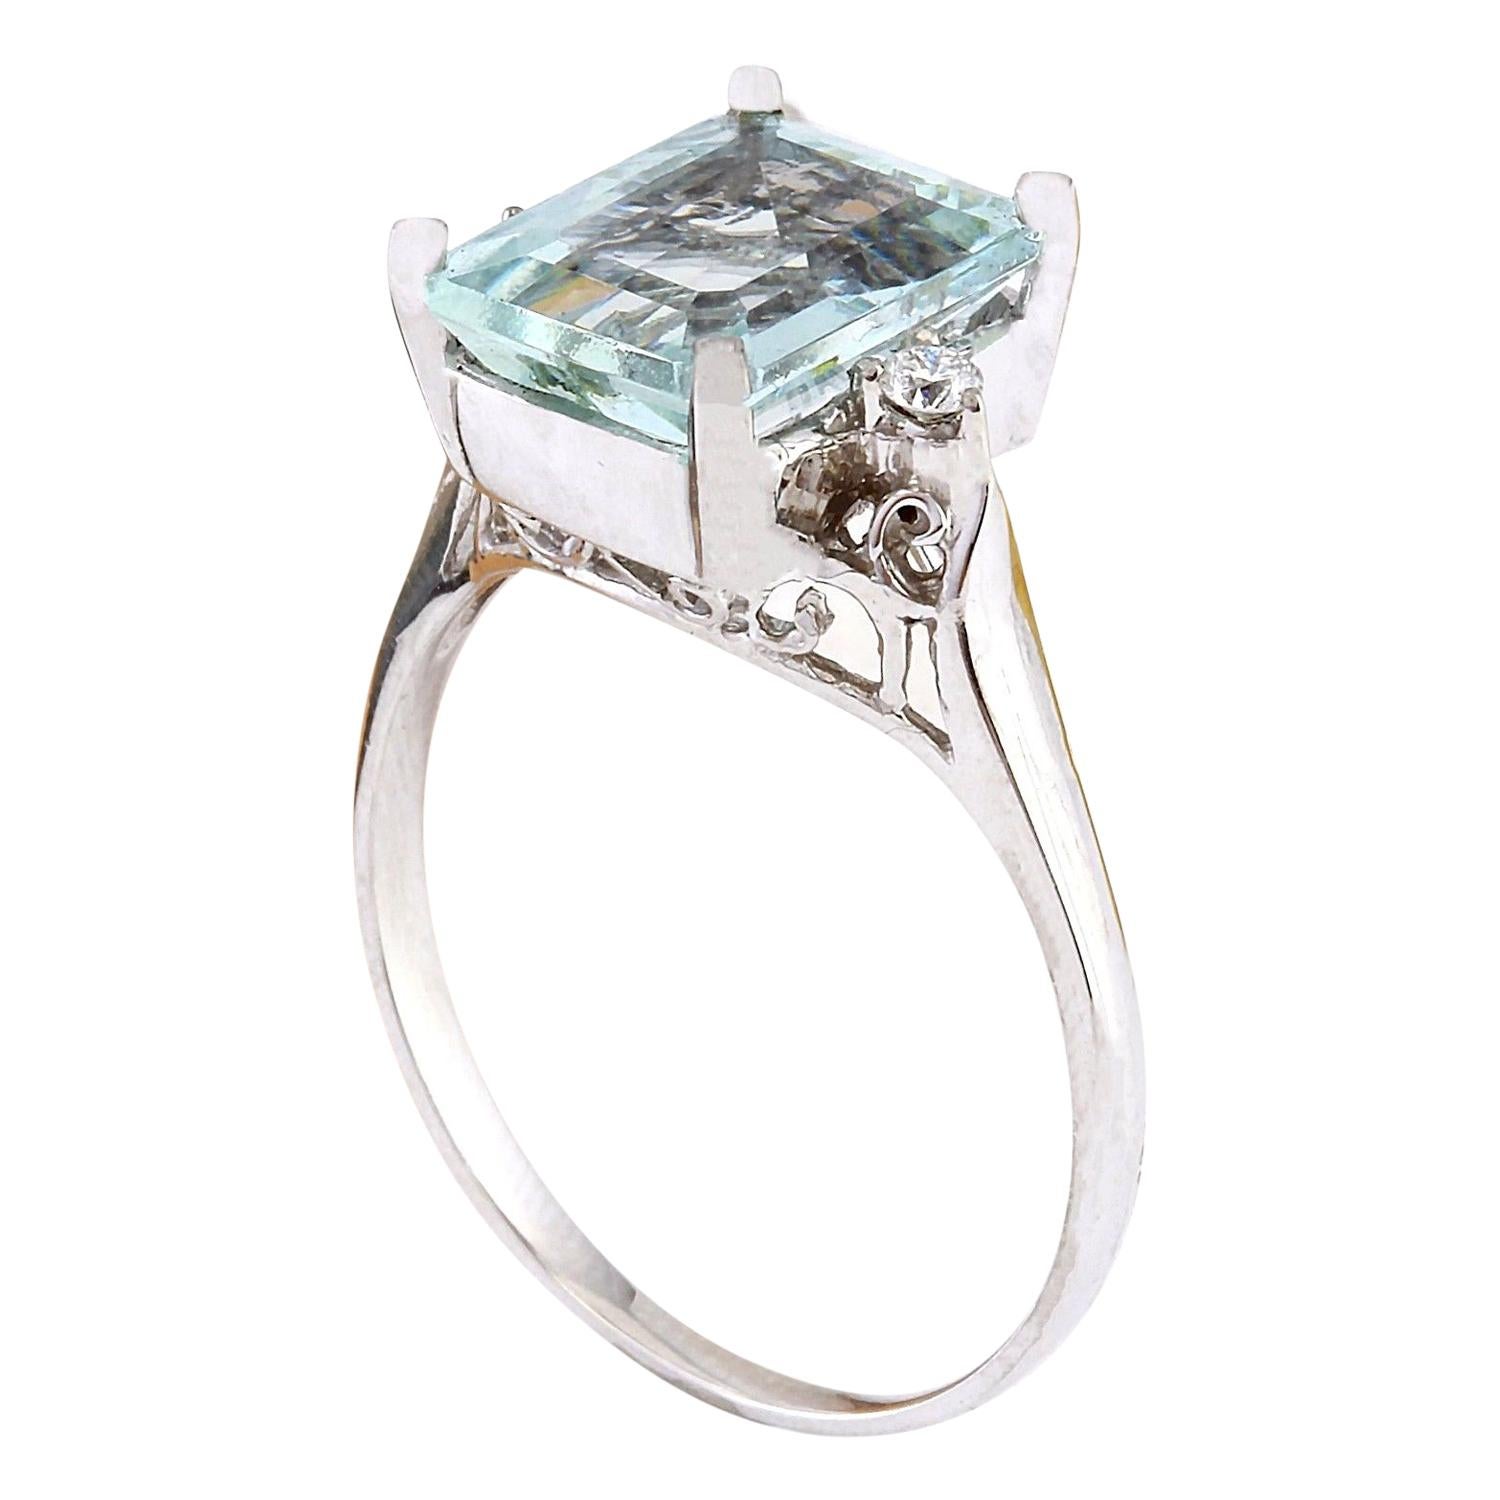 4.34 Carat Natural Aquamarine 14 Karat Solid White Gold Diamond Ring In New Condition For Sale In Los Angeles, CA